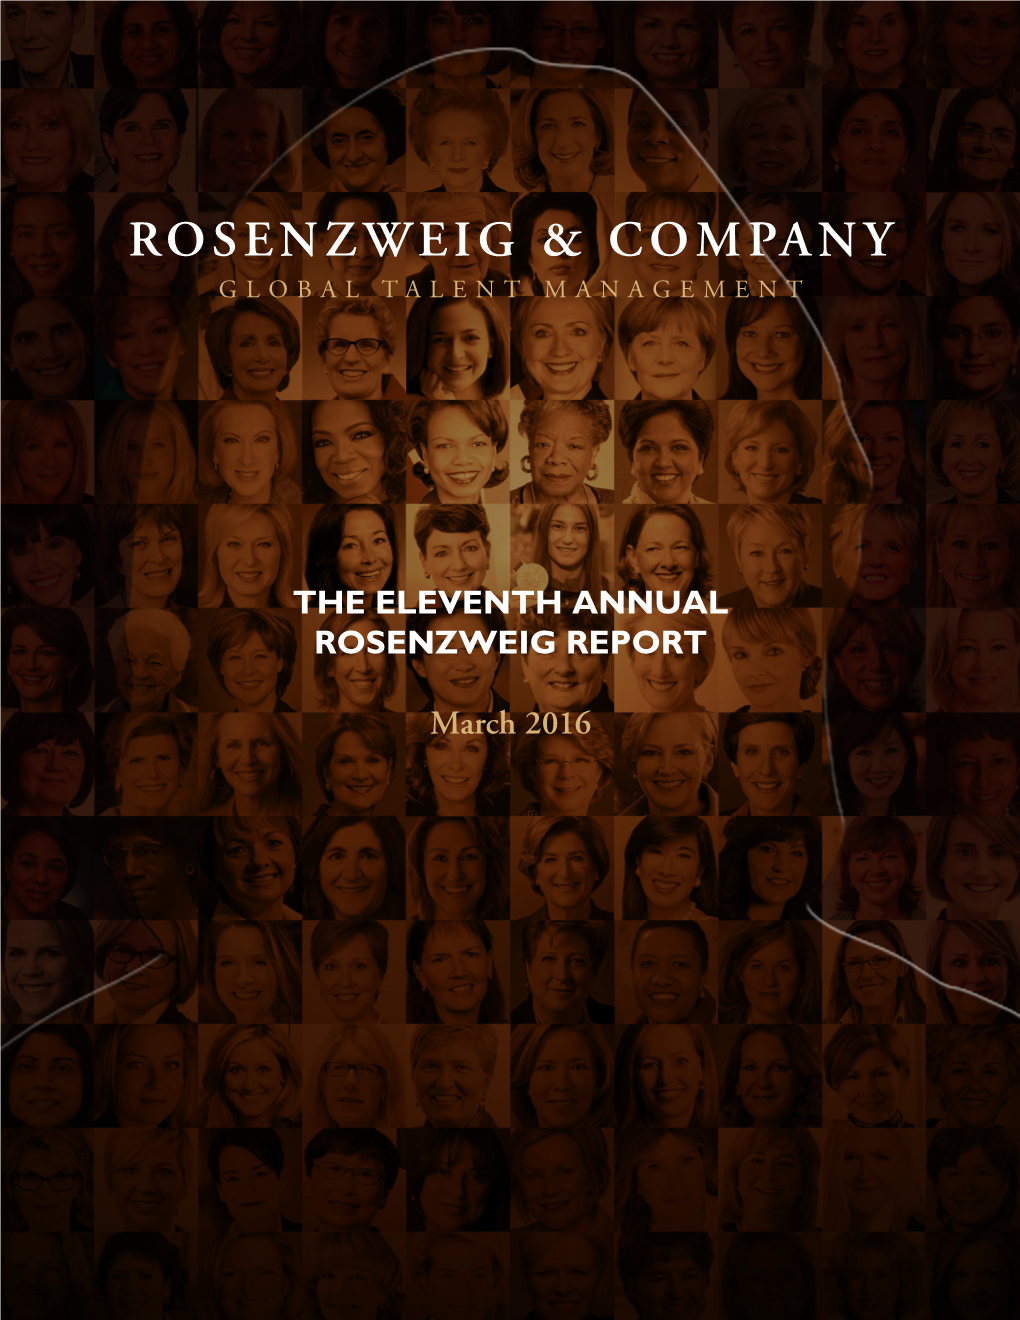 QUOTES: Notable Contributions and Reactions to the Rosenzweig Report